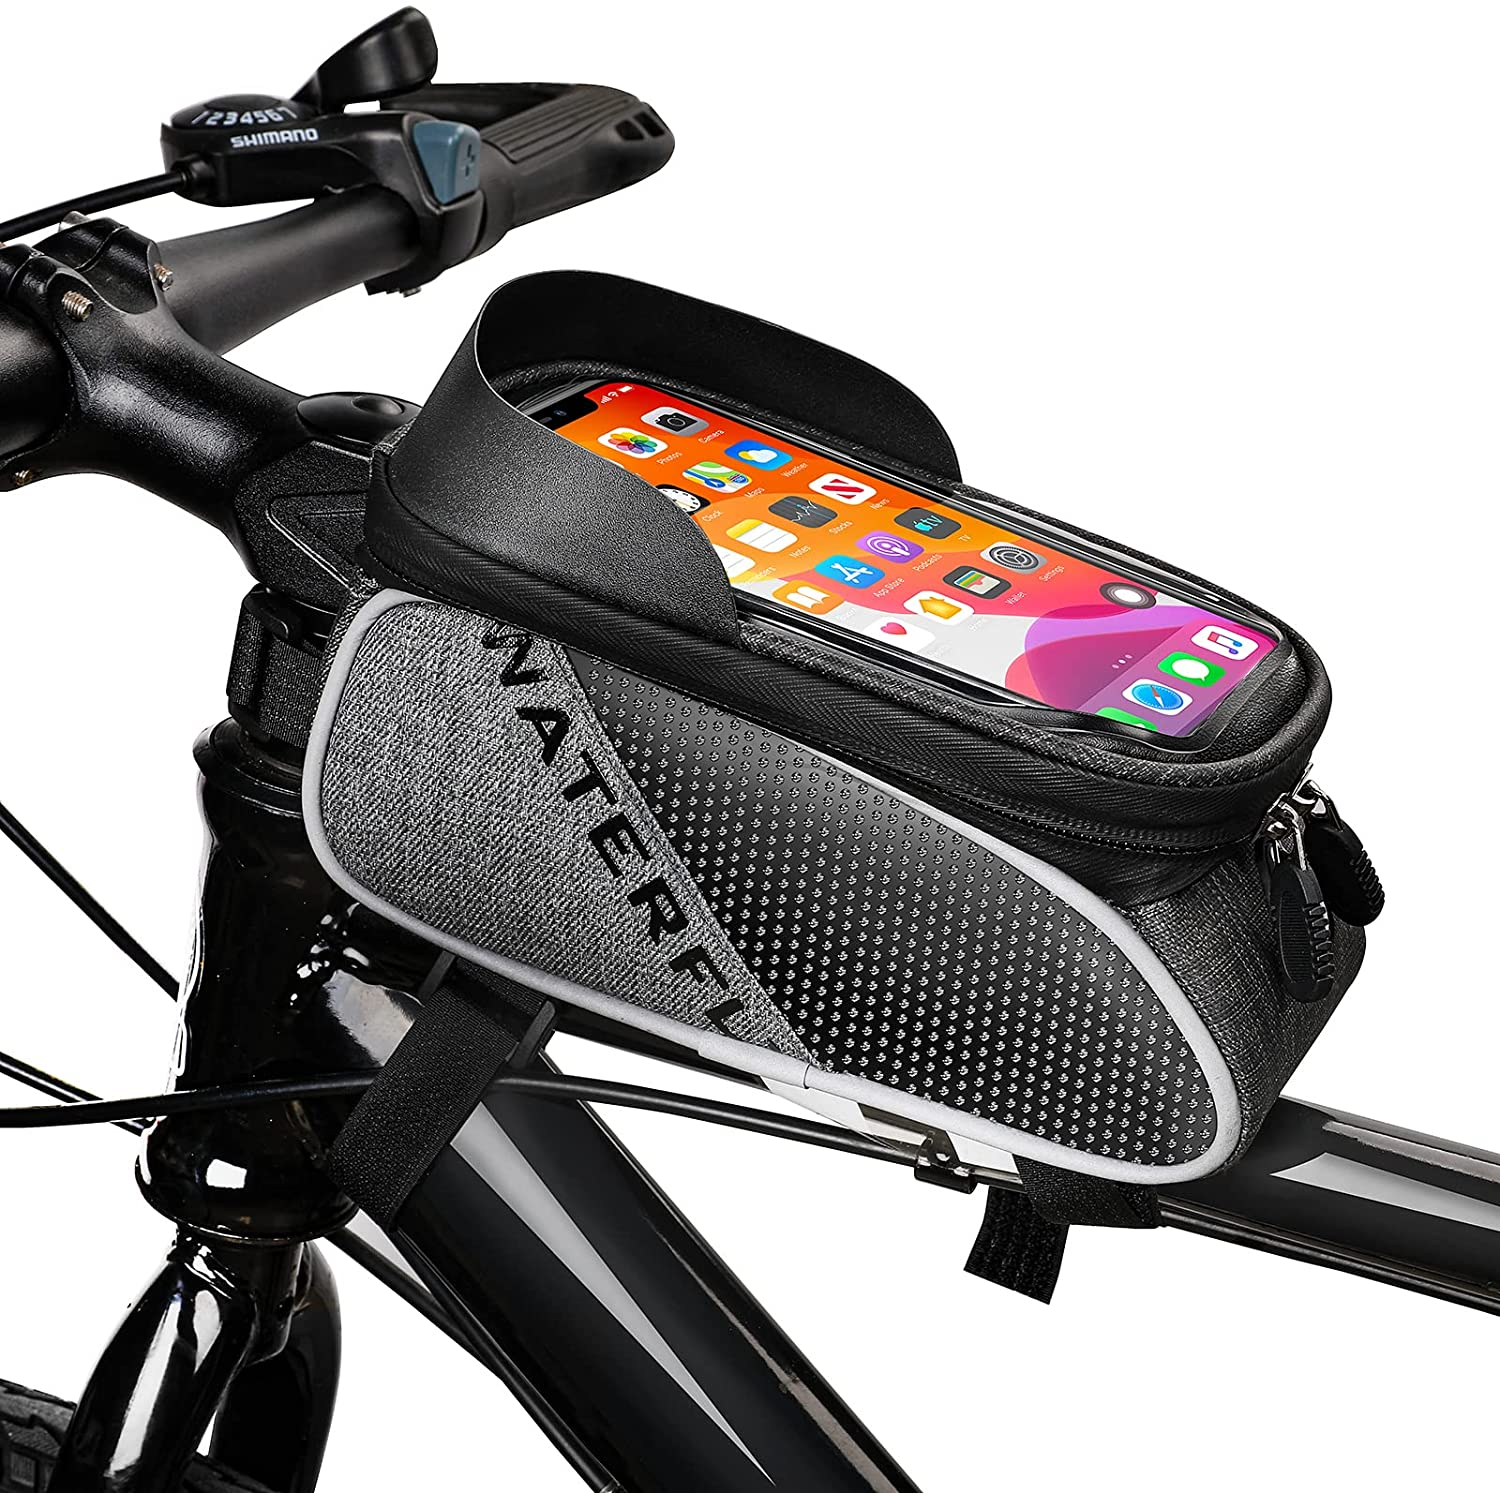 If you use your phone for navigation while cycling, this waterproof front frame bag will be perfect for you.